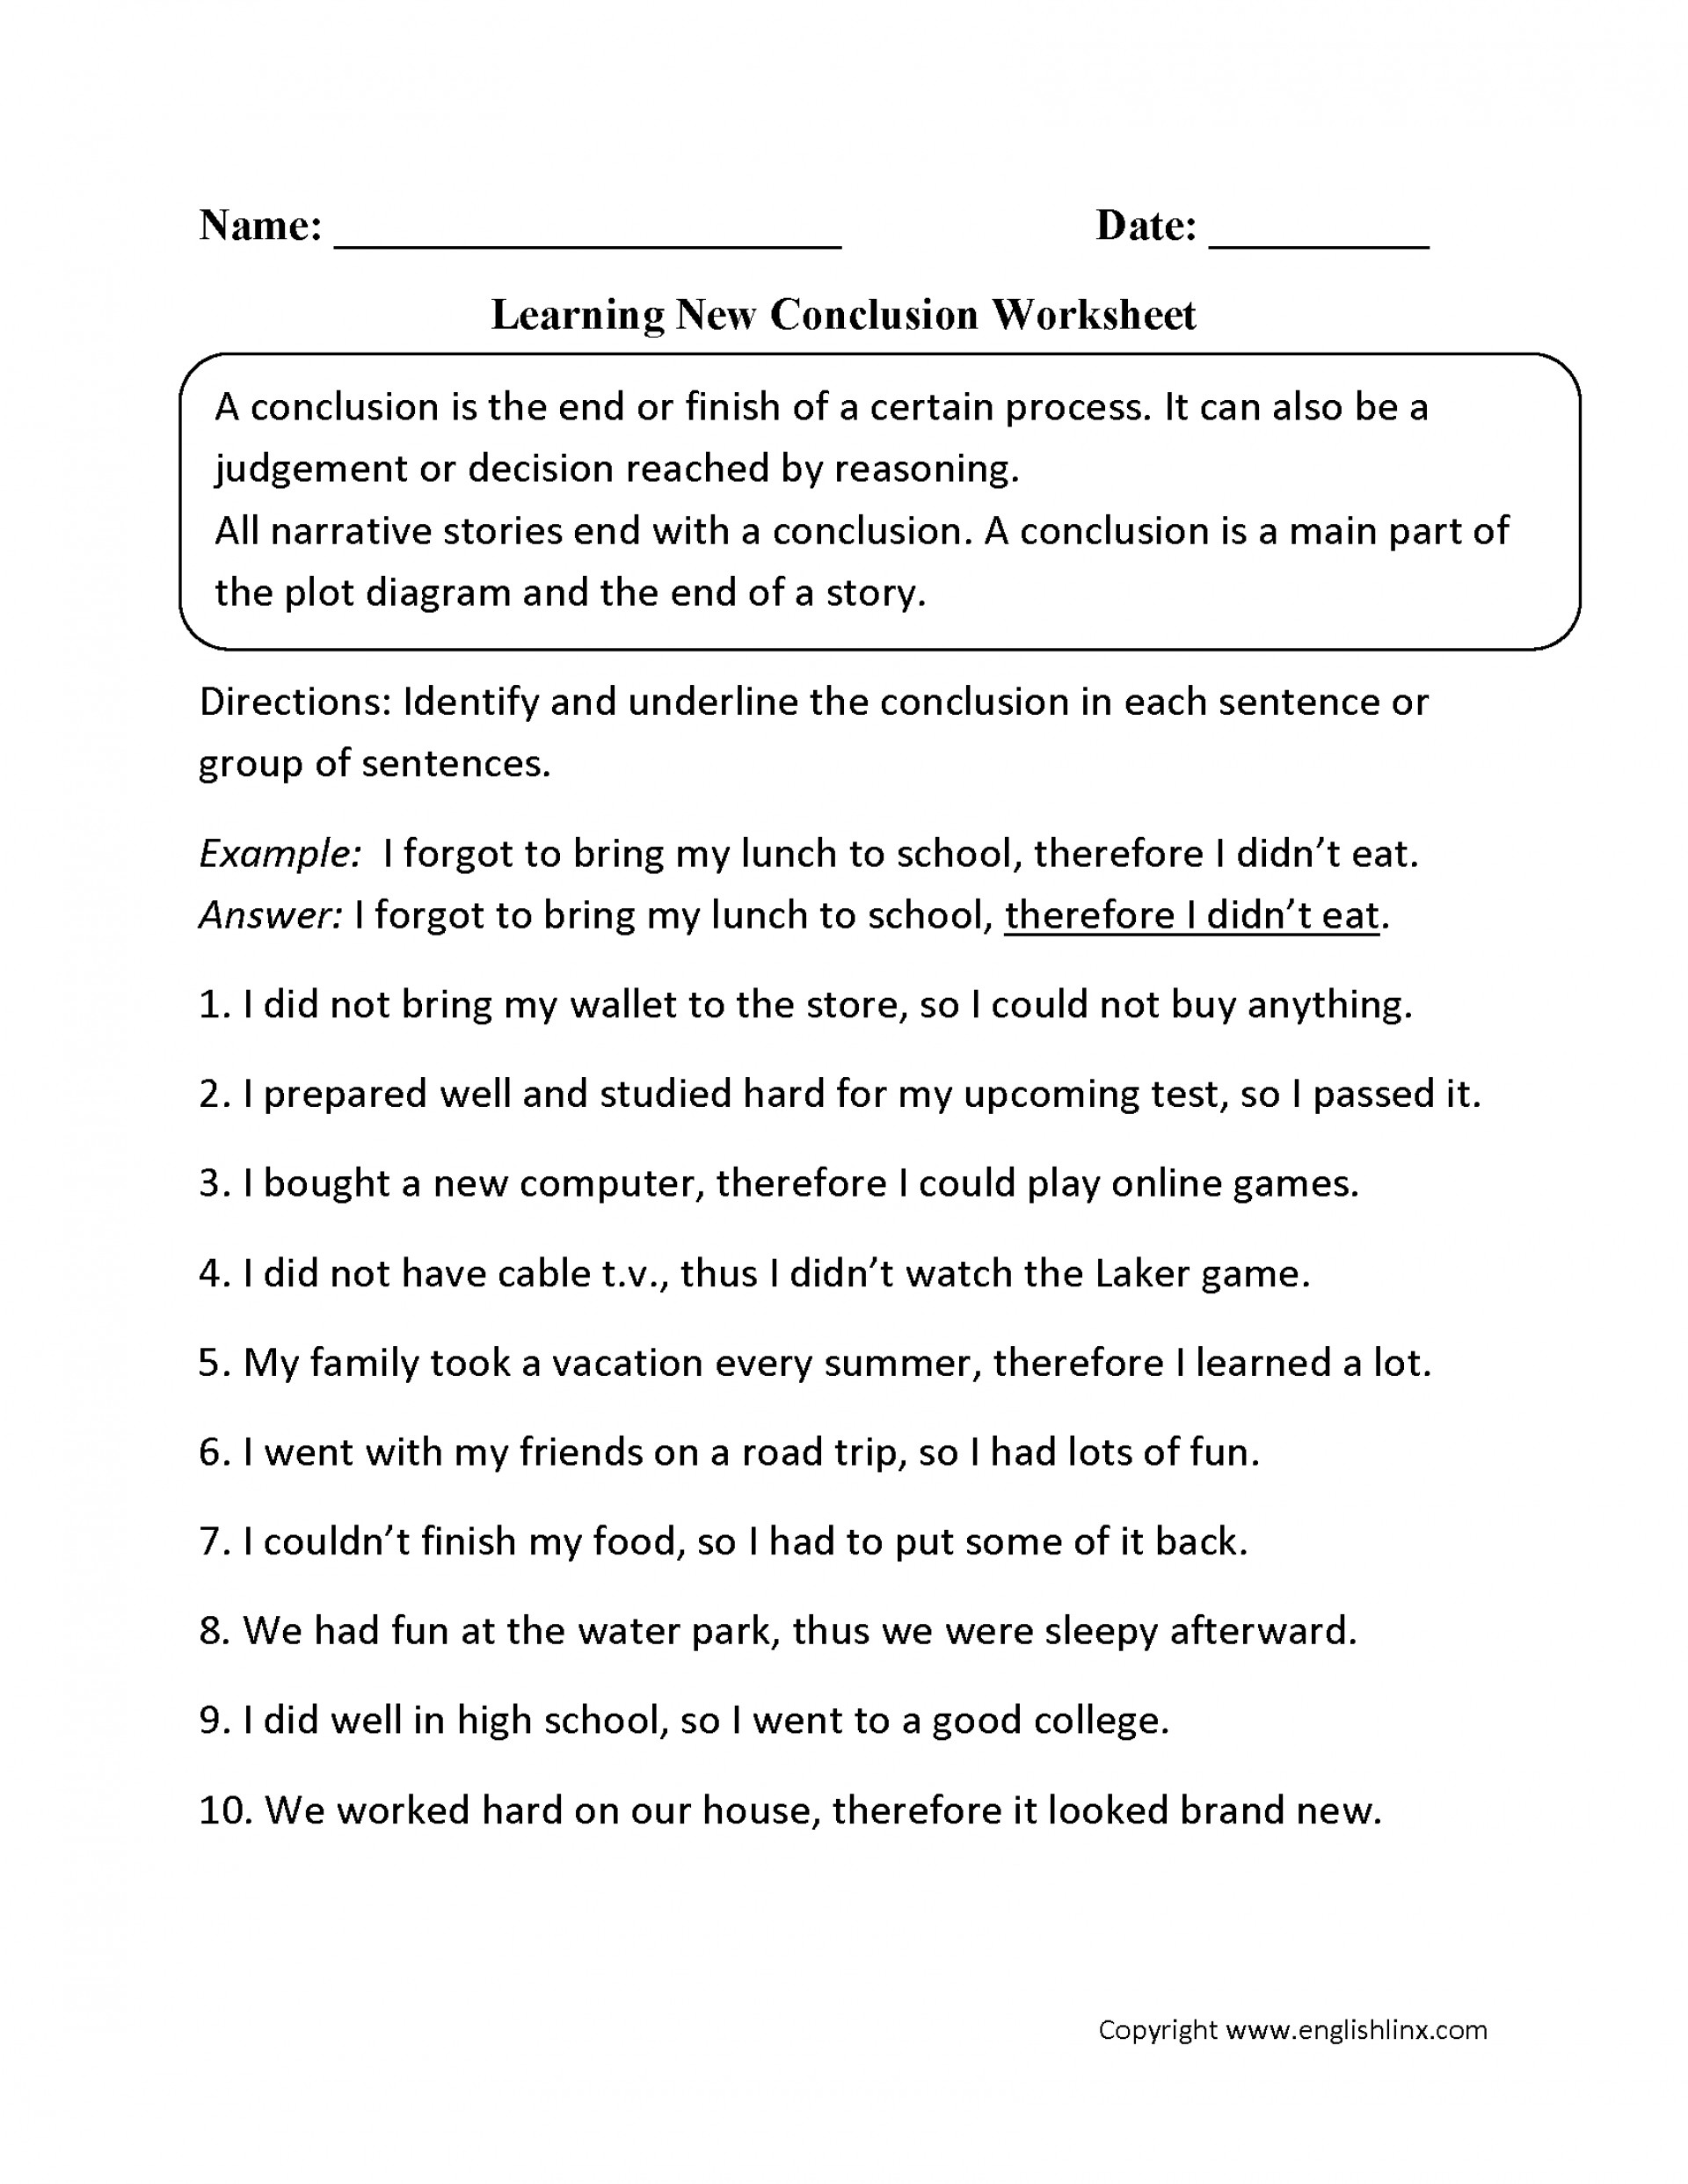 015 How To Write Conclusion For Project Learning New Worksheet